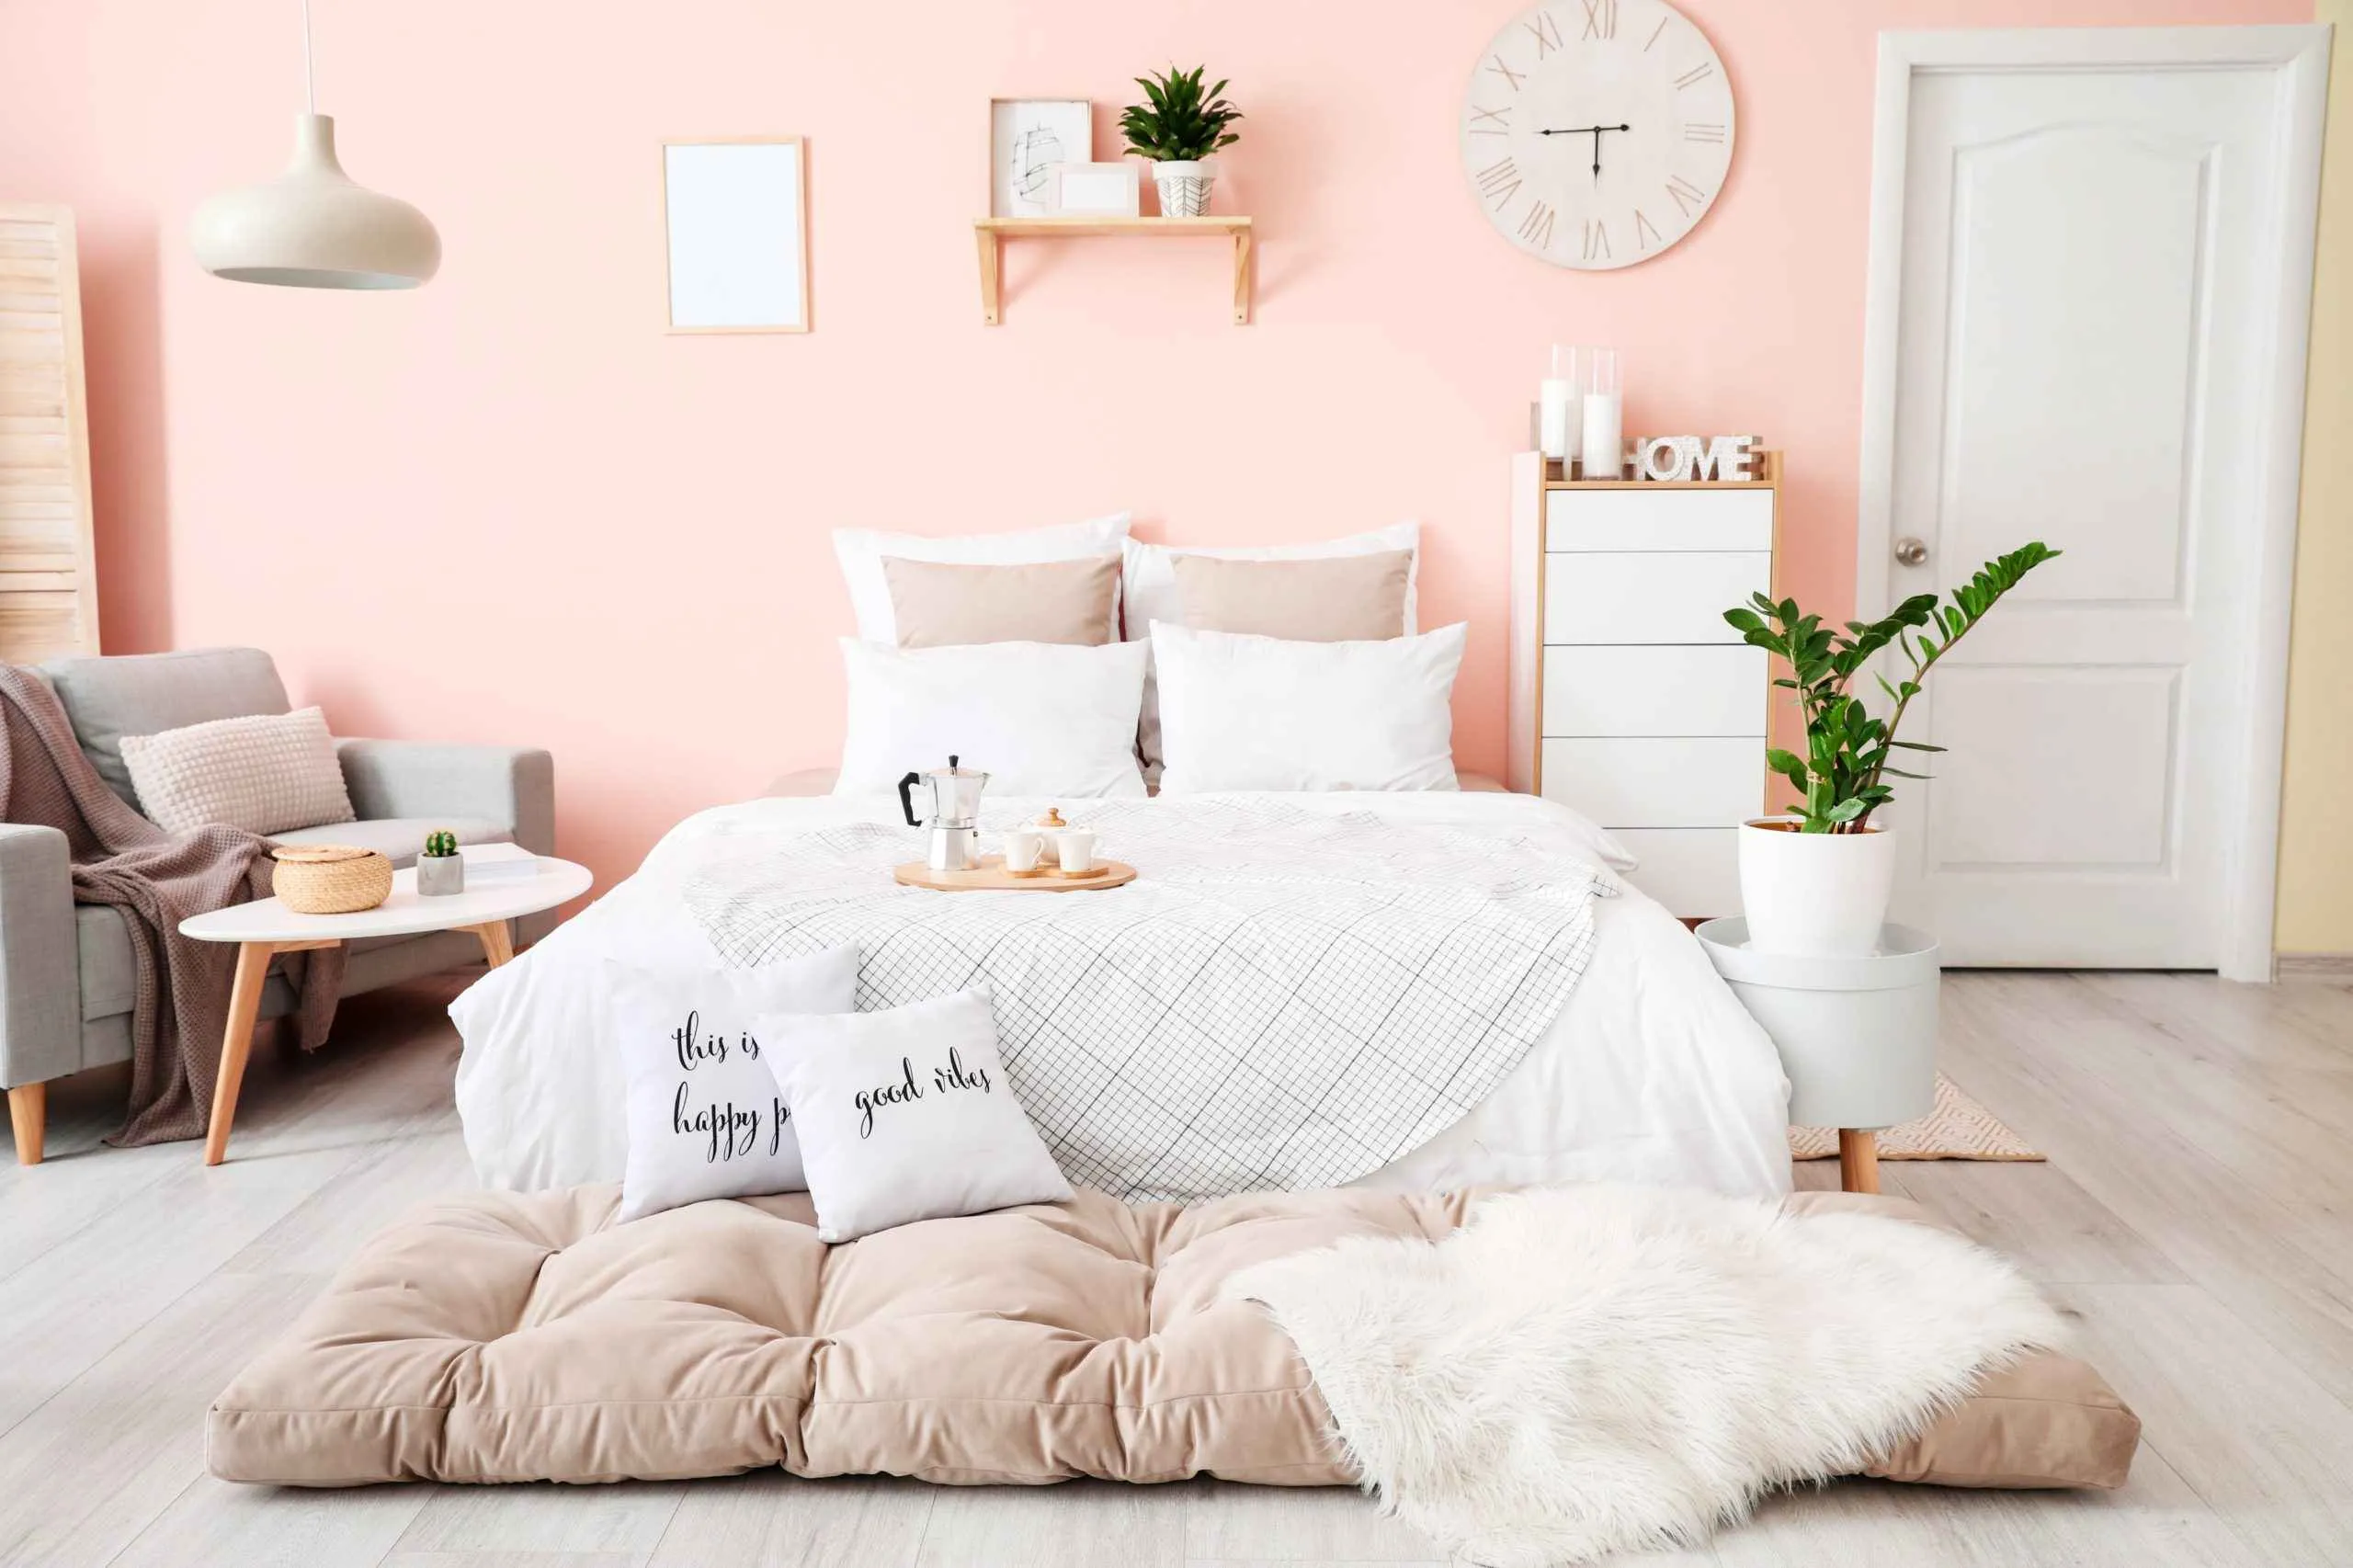 peach bedroom with white bed, grey chair, white cabinet, plants and pendant light